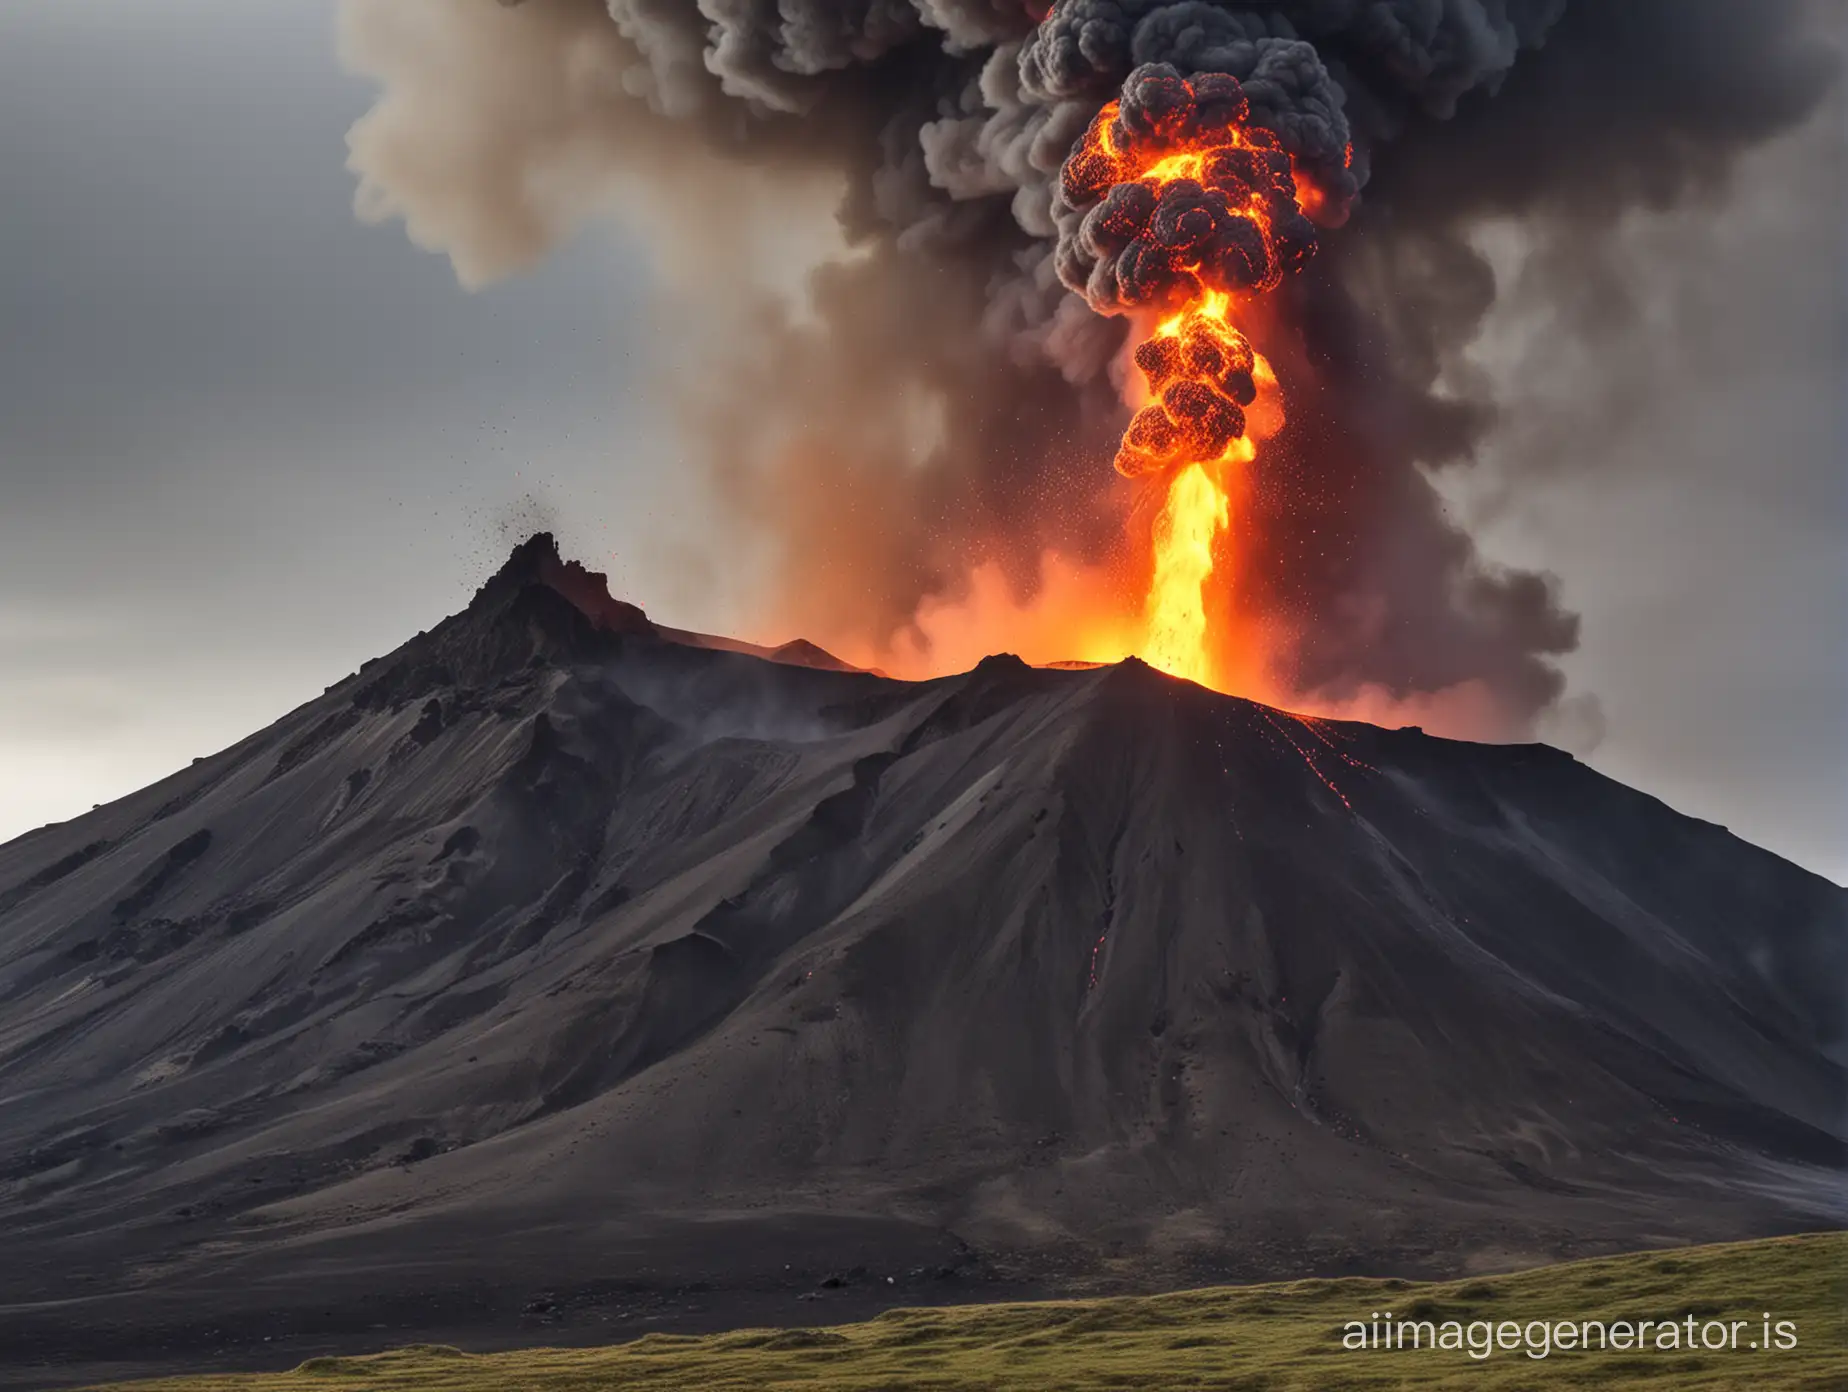 A volcano erupting on the edge of a mountain in Iceland